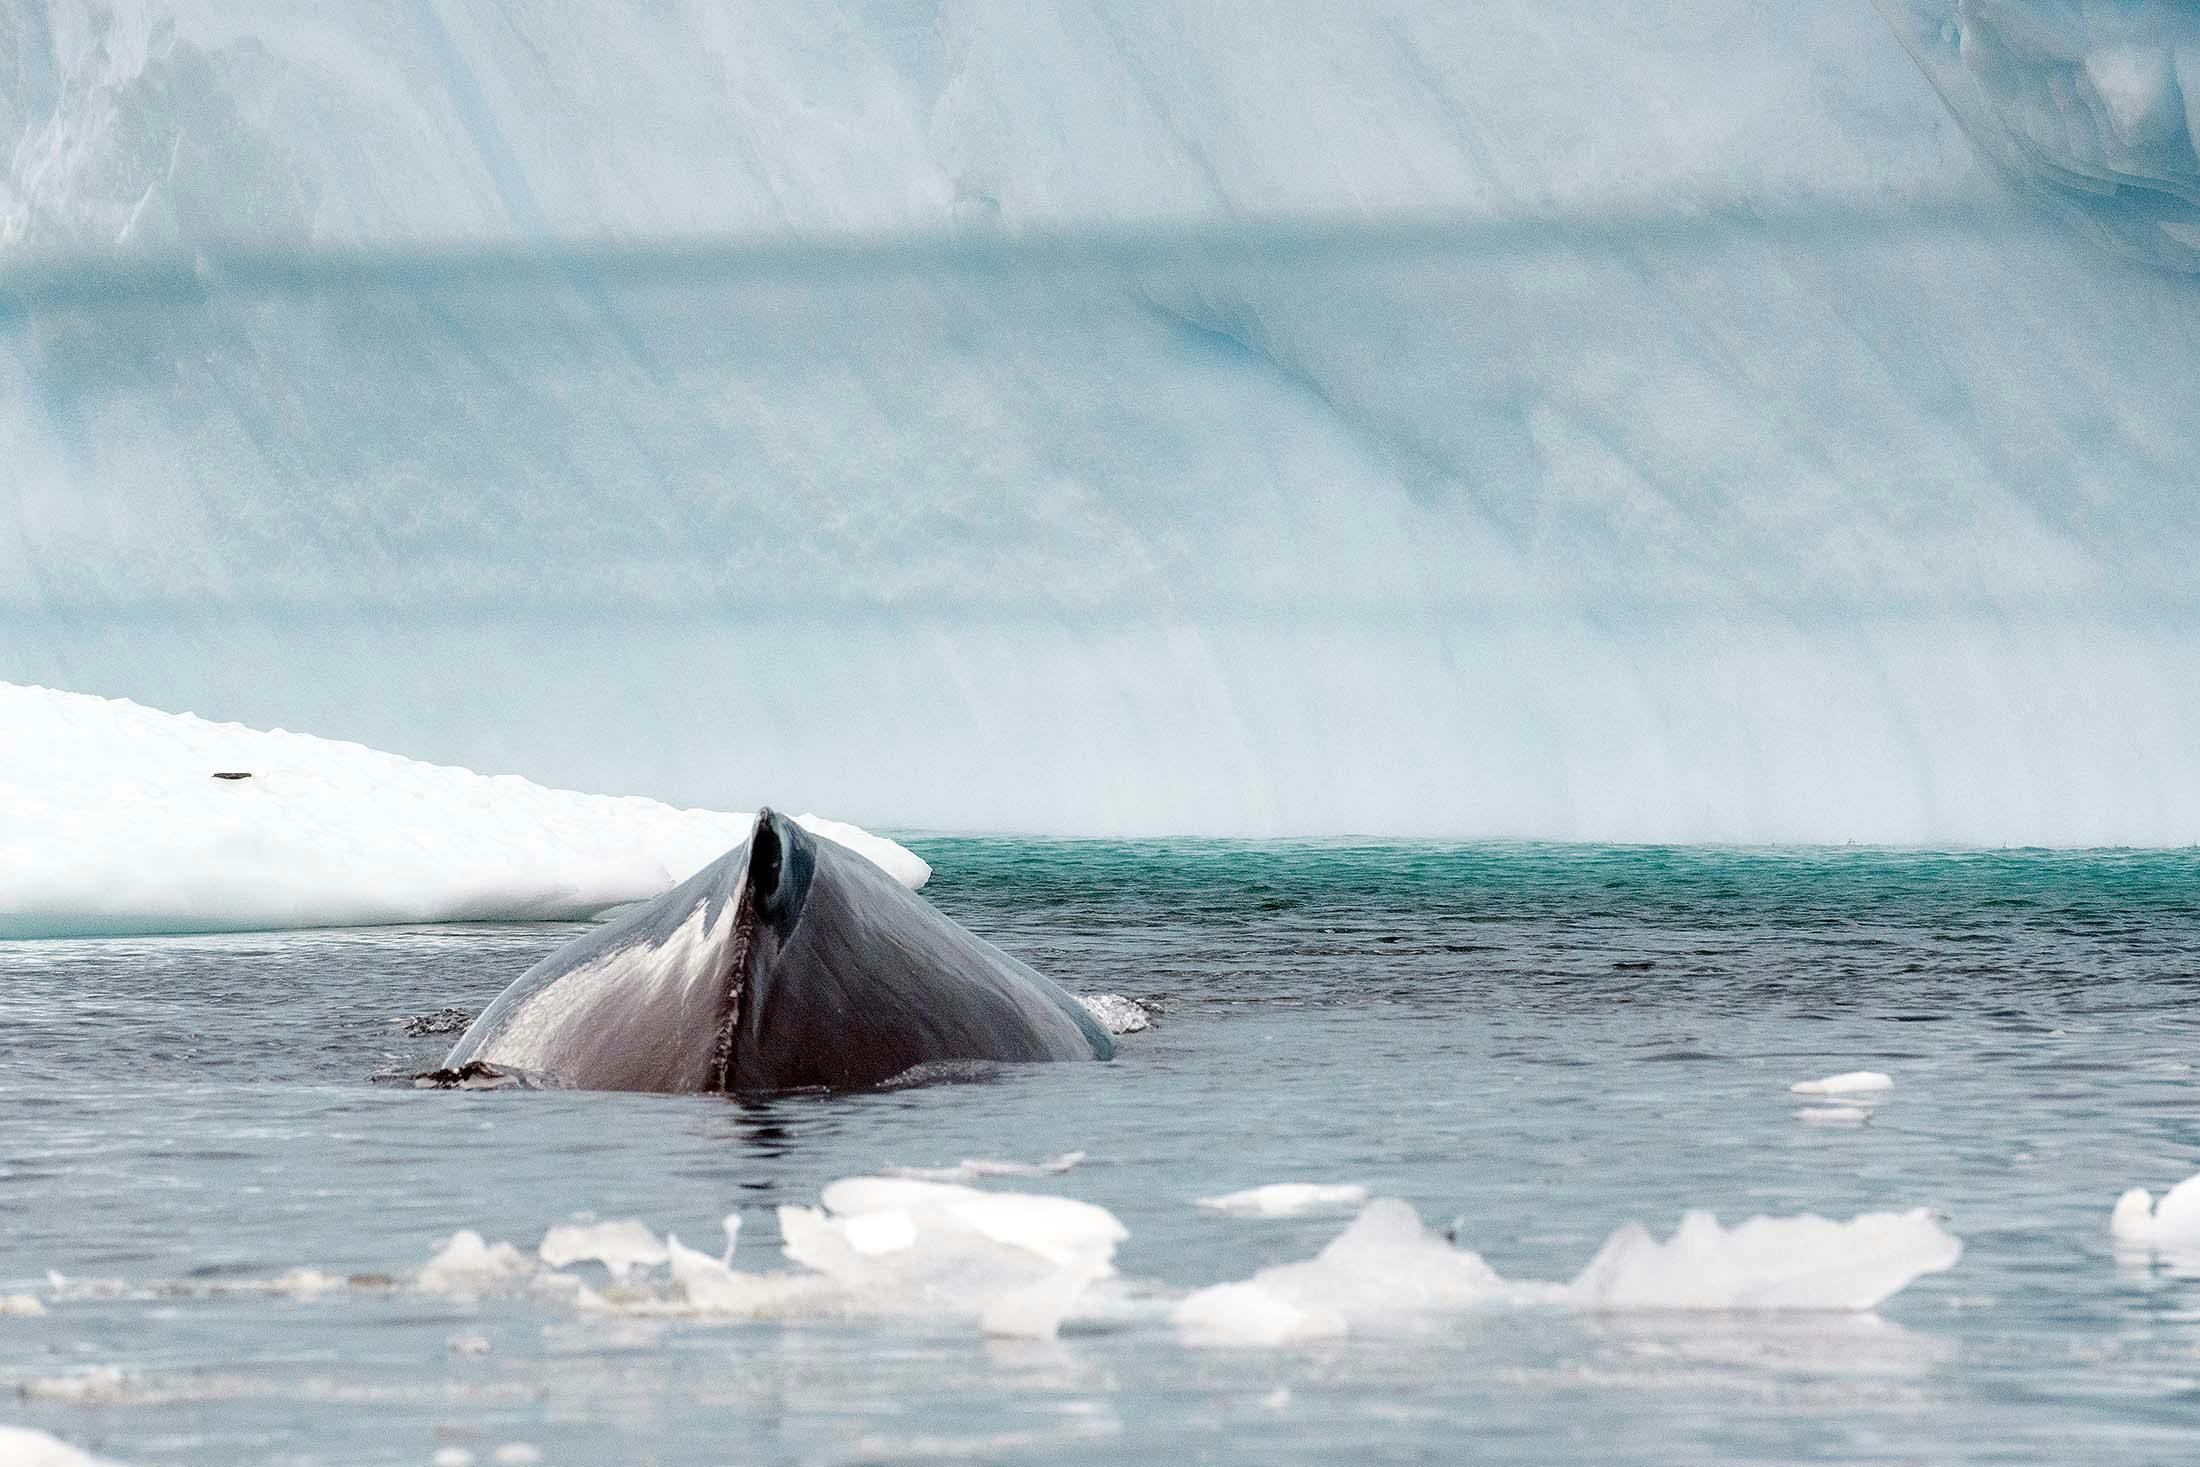 A humpback whale spotted near Danco Island on a recent Antarctica cruise.